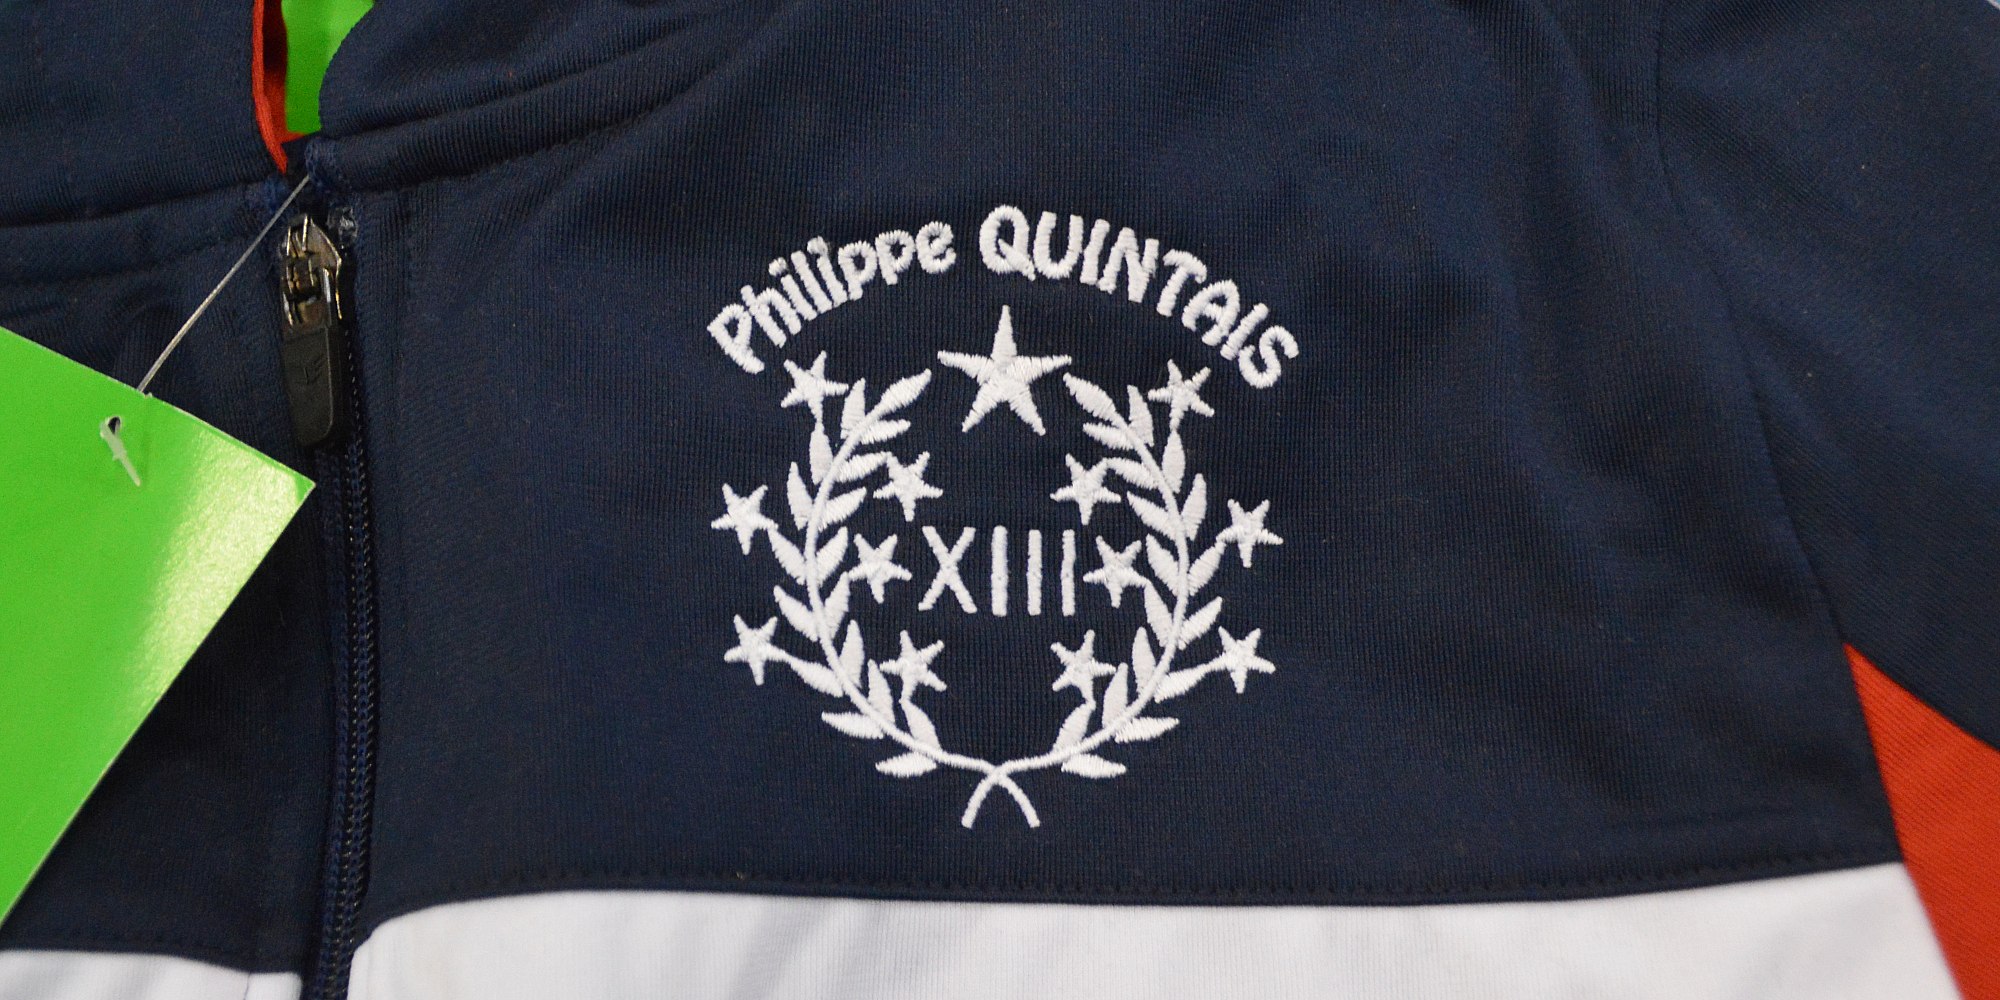 Philippe Quintais branded clothing